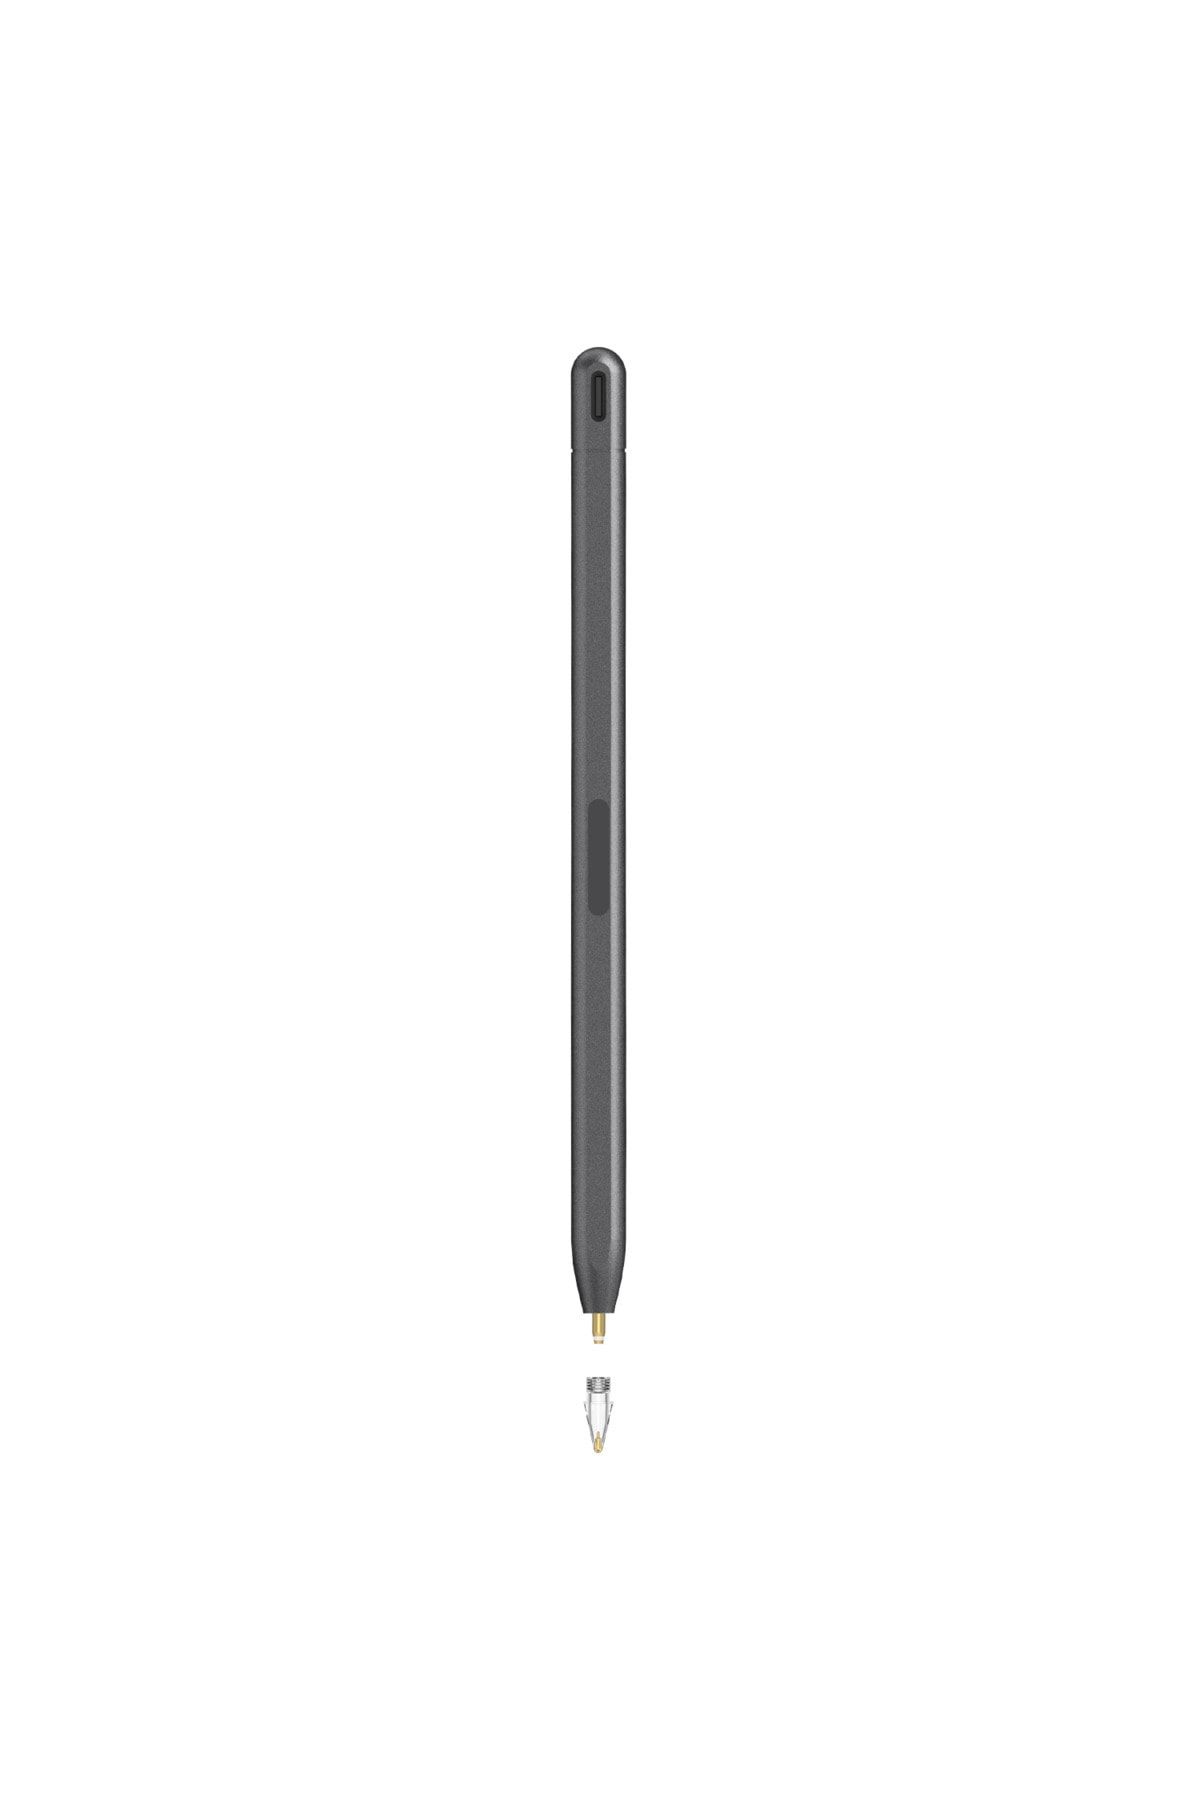 Momax Mag.lik Pro Magnetic Charging Active Stylus Pen